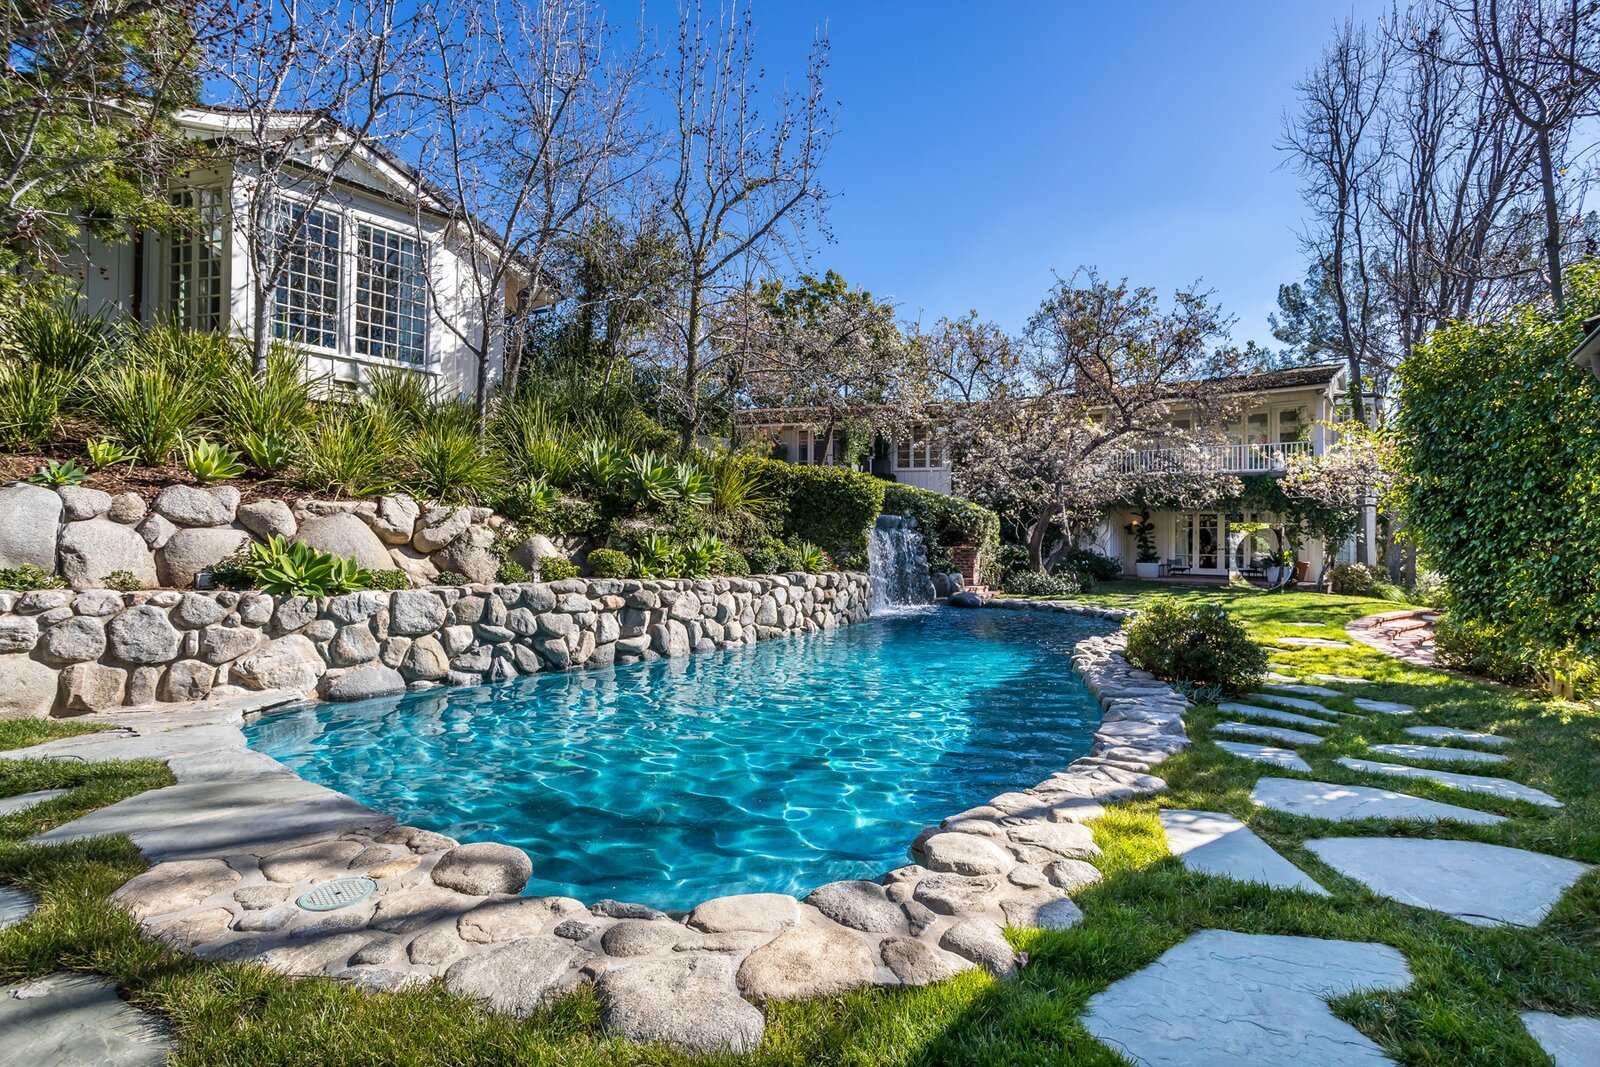 Jim Carrey’s Longtime L.A. Home Hits the Market at $29M